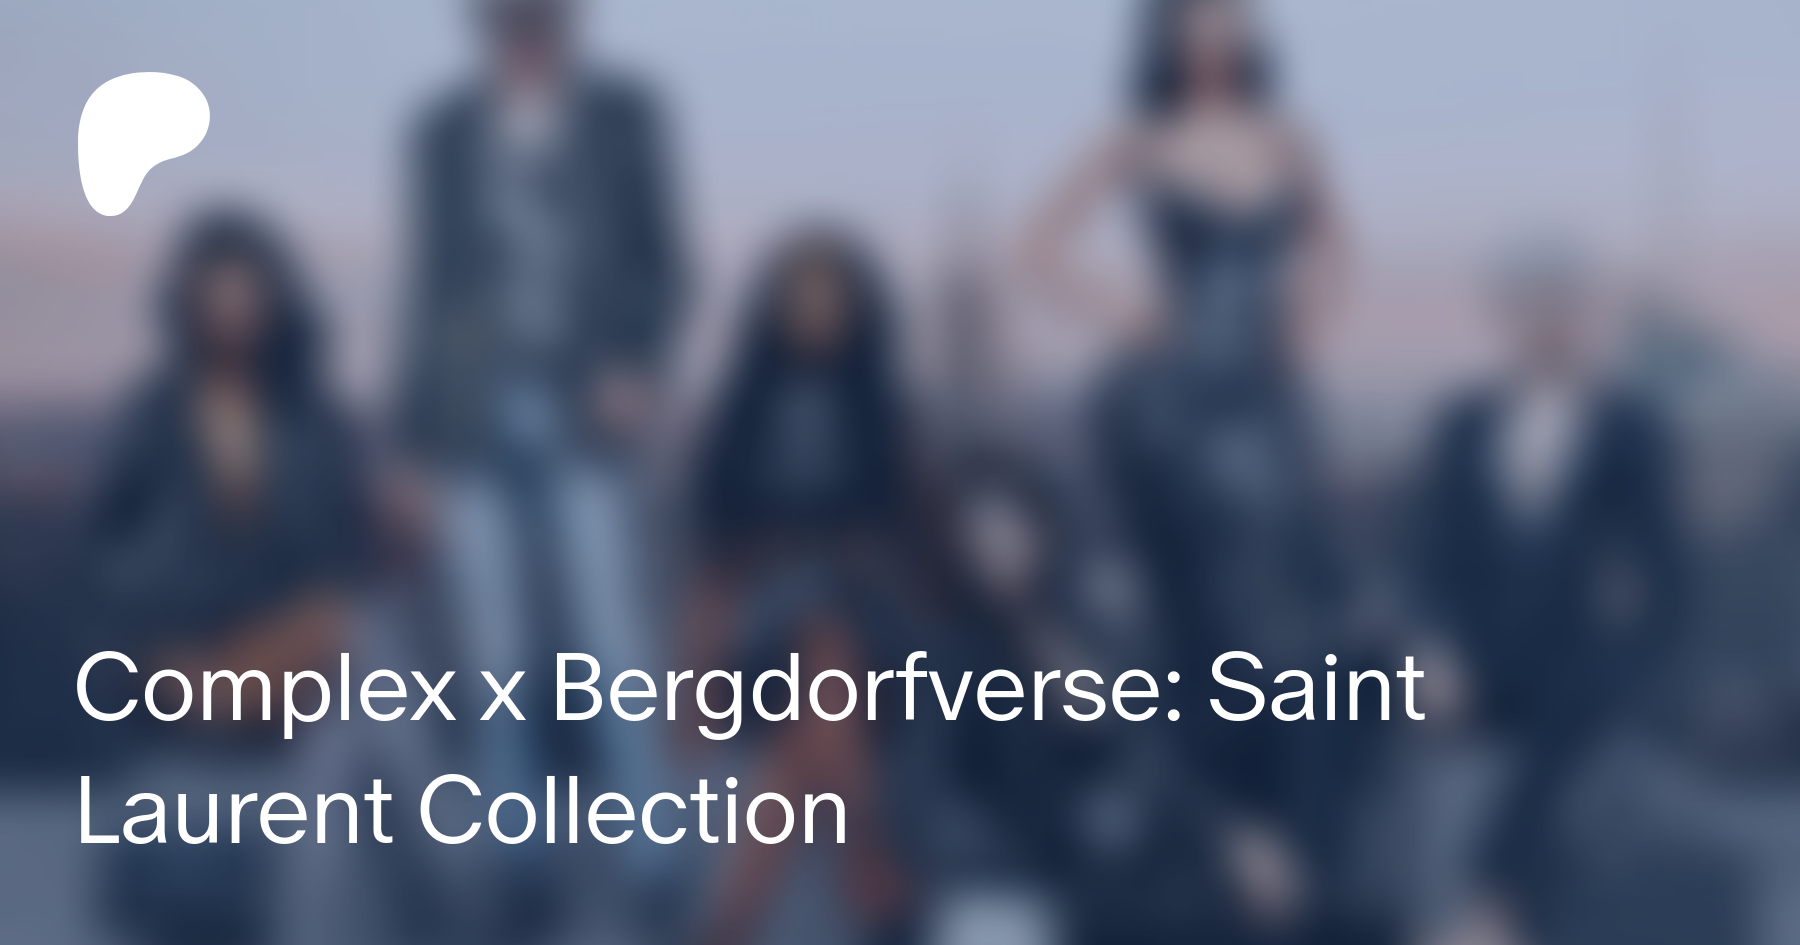 Complex x Bergdorfverse: Saint Laurent Collection by bergdorfsims from  Patreon